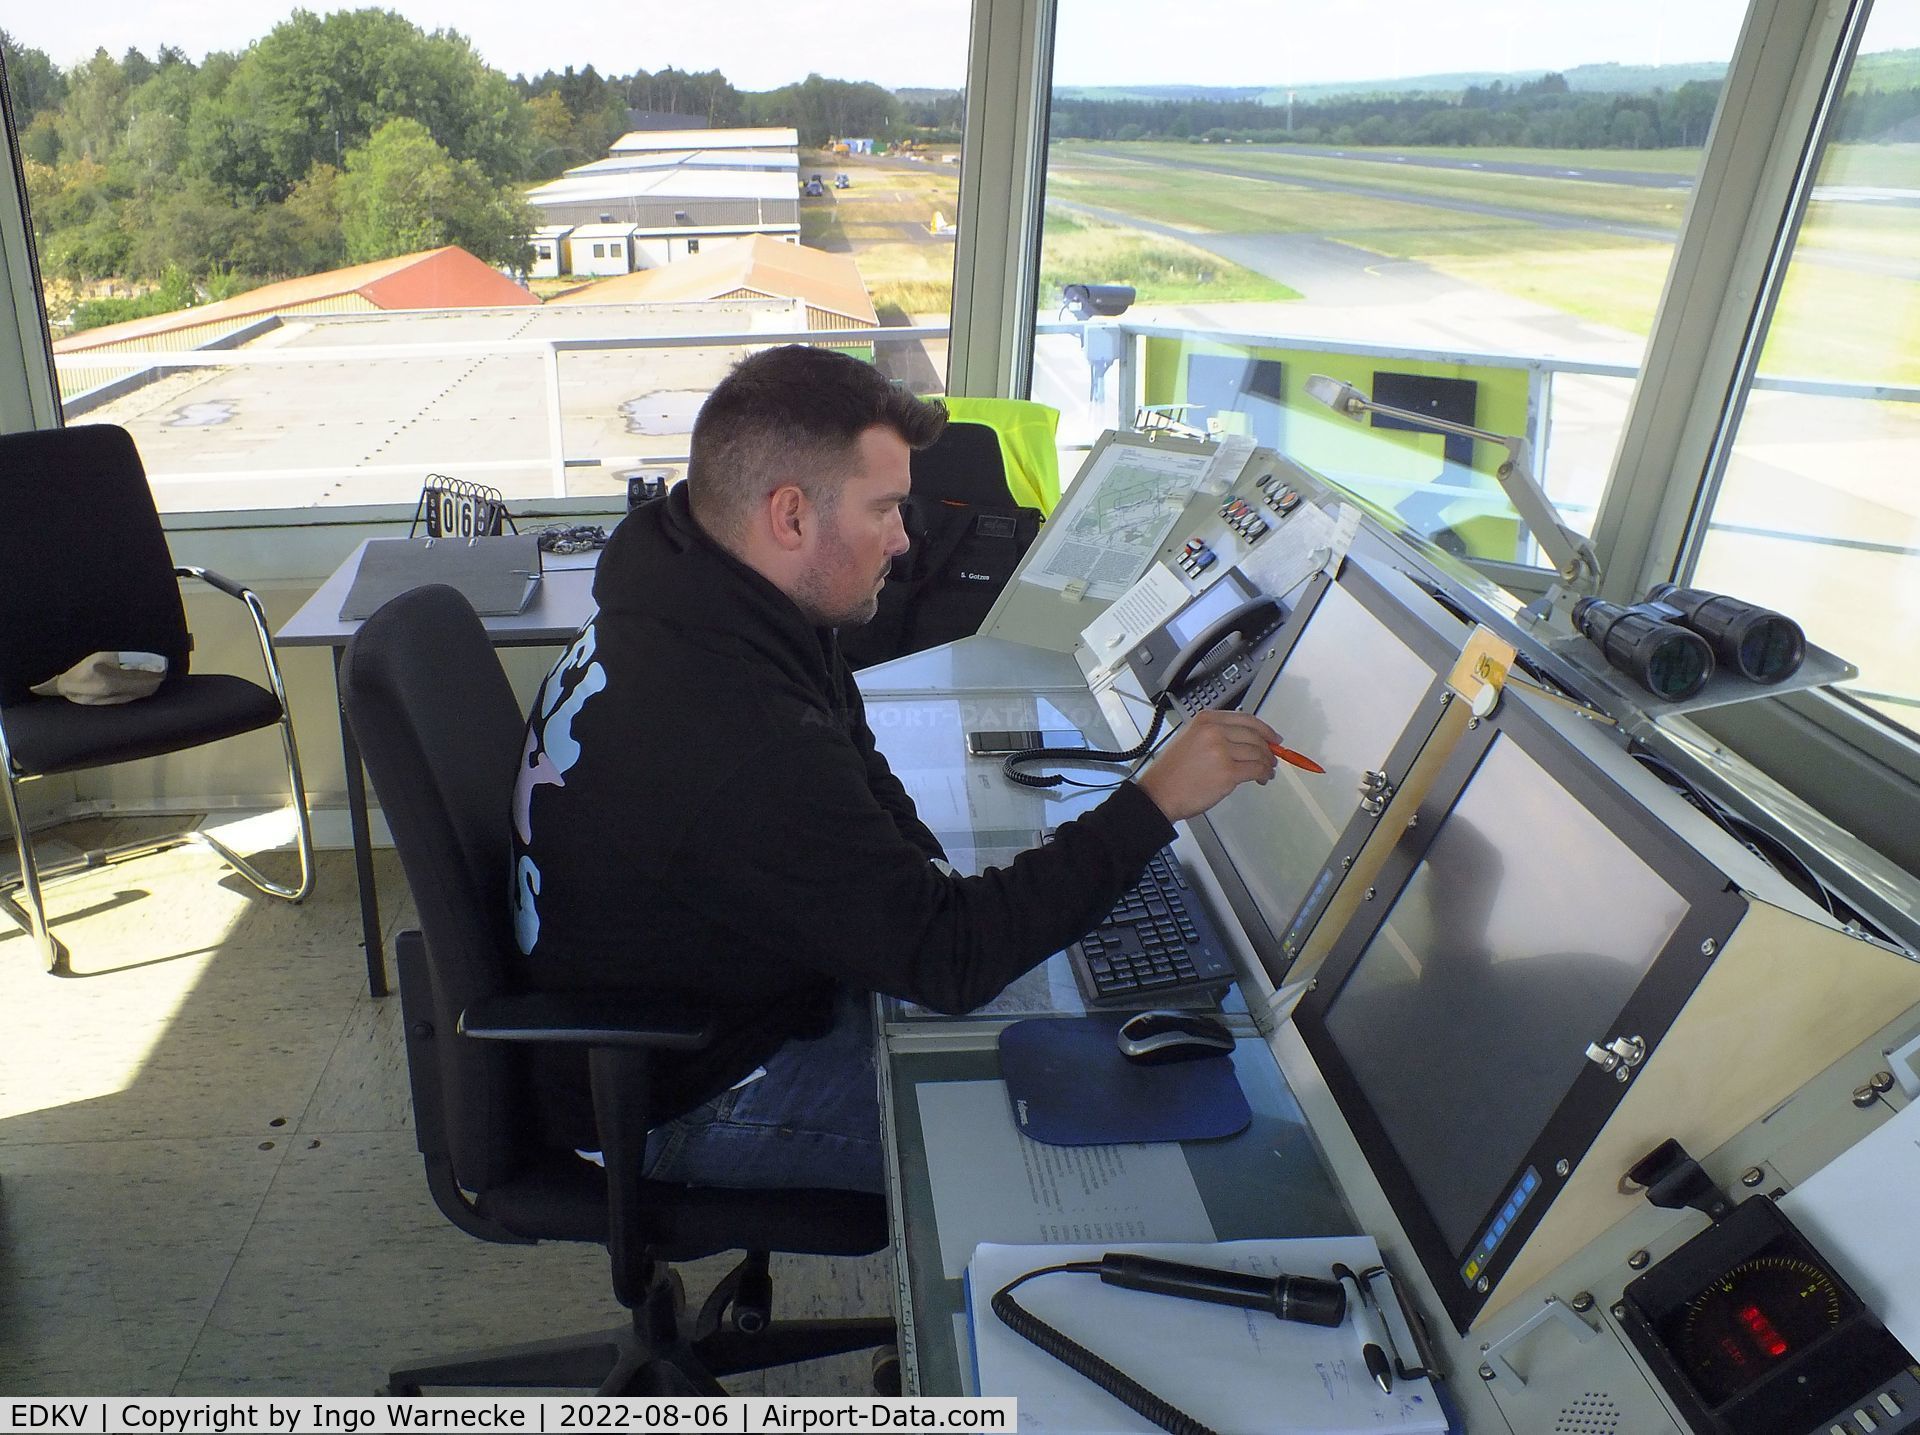 Dahlemer Binz Airport, Dahlem Germany (EDKV) - inside the tower at Dahlemer Binz airfield (the gentleman of the airfield tower crew has consented by email to his photo being shown on this site)